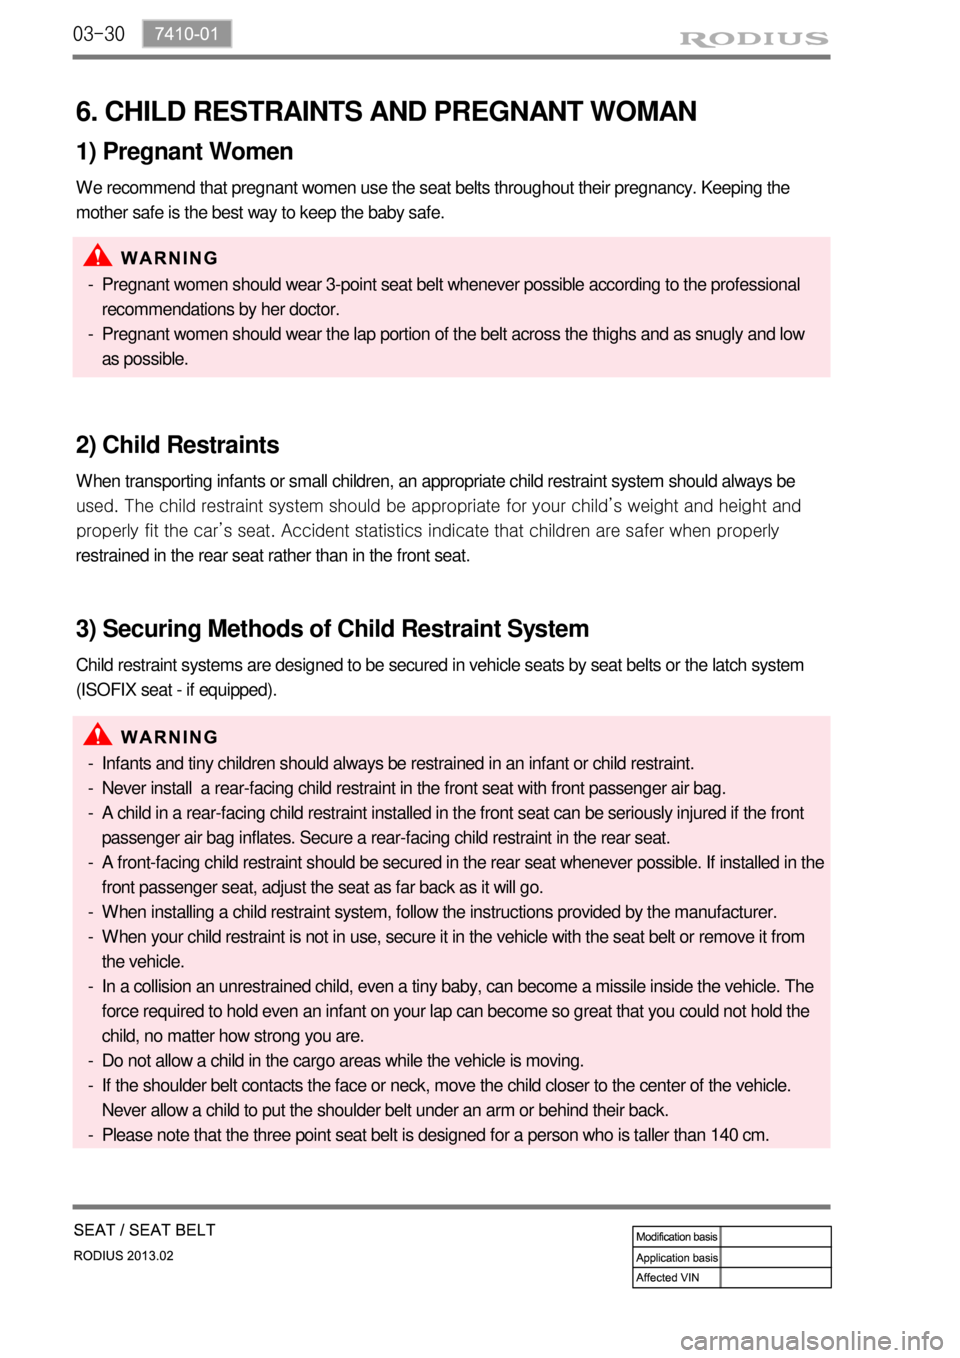 SSANGYONG TURISMO 2013  Service Manual 03-30
6. CHILD RESTRAINTS AND PREGNANT WOMAN
1) Pregnant Women
We recommend that pregnant women use the seat belts throughout their pregnancy. Keeping the 
mother safe is the best way to keep the baby